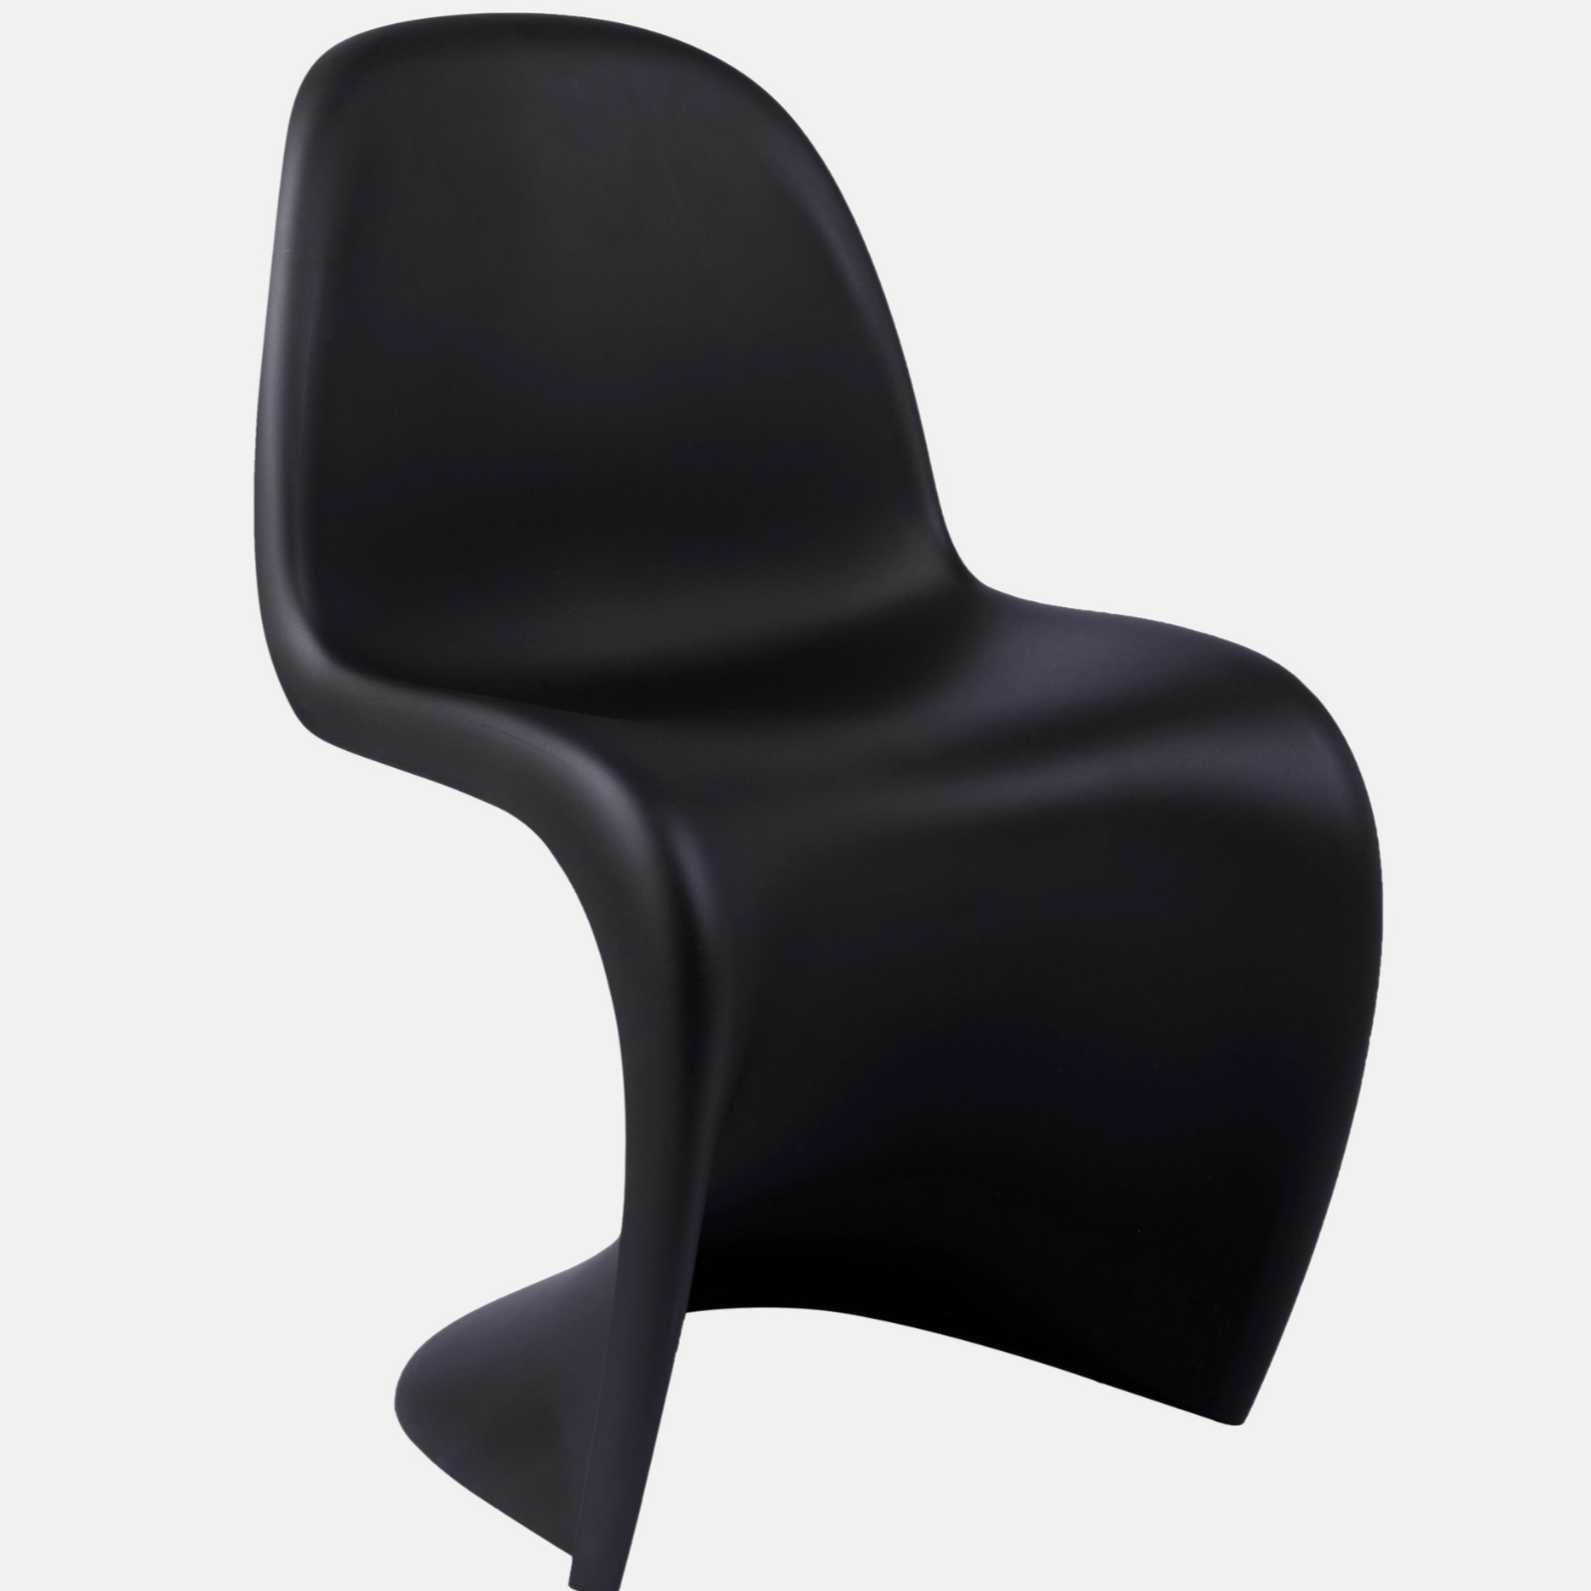 Ned Collections S-Shape Childs Chair - Black